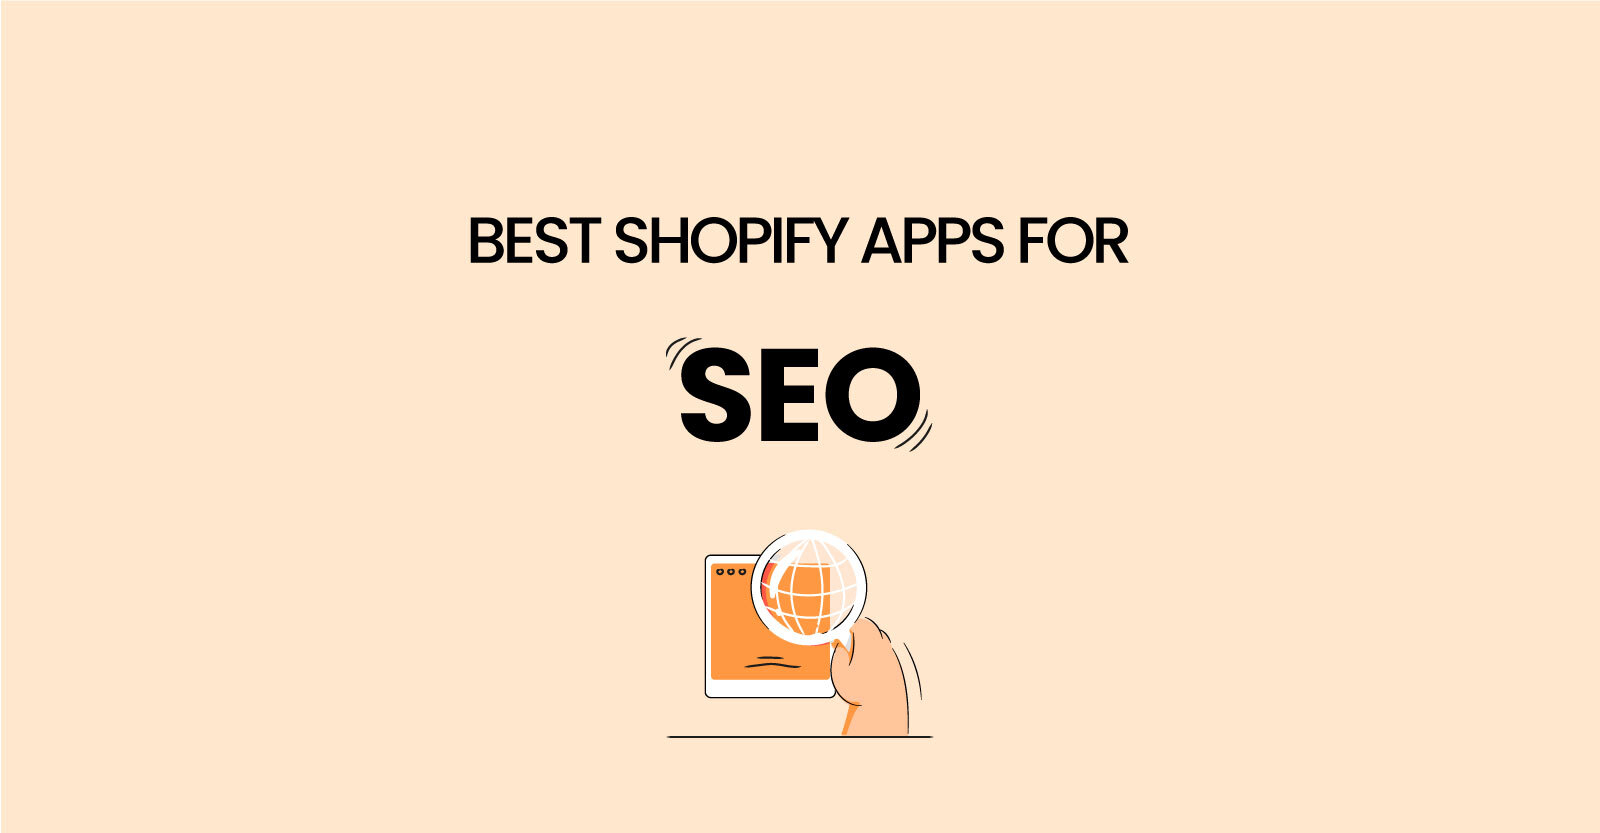 6 Best SEO Apps for Shopify: Get Your Store Ranking High in 2022